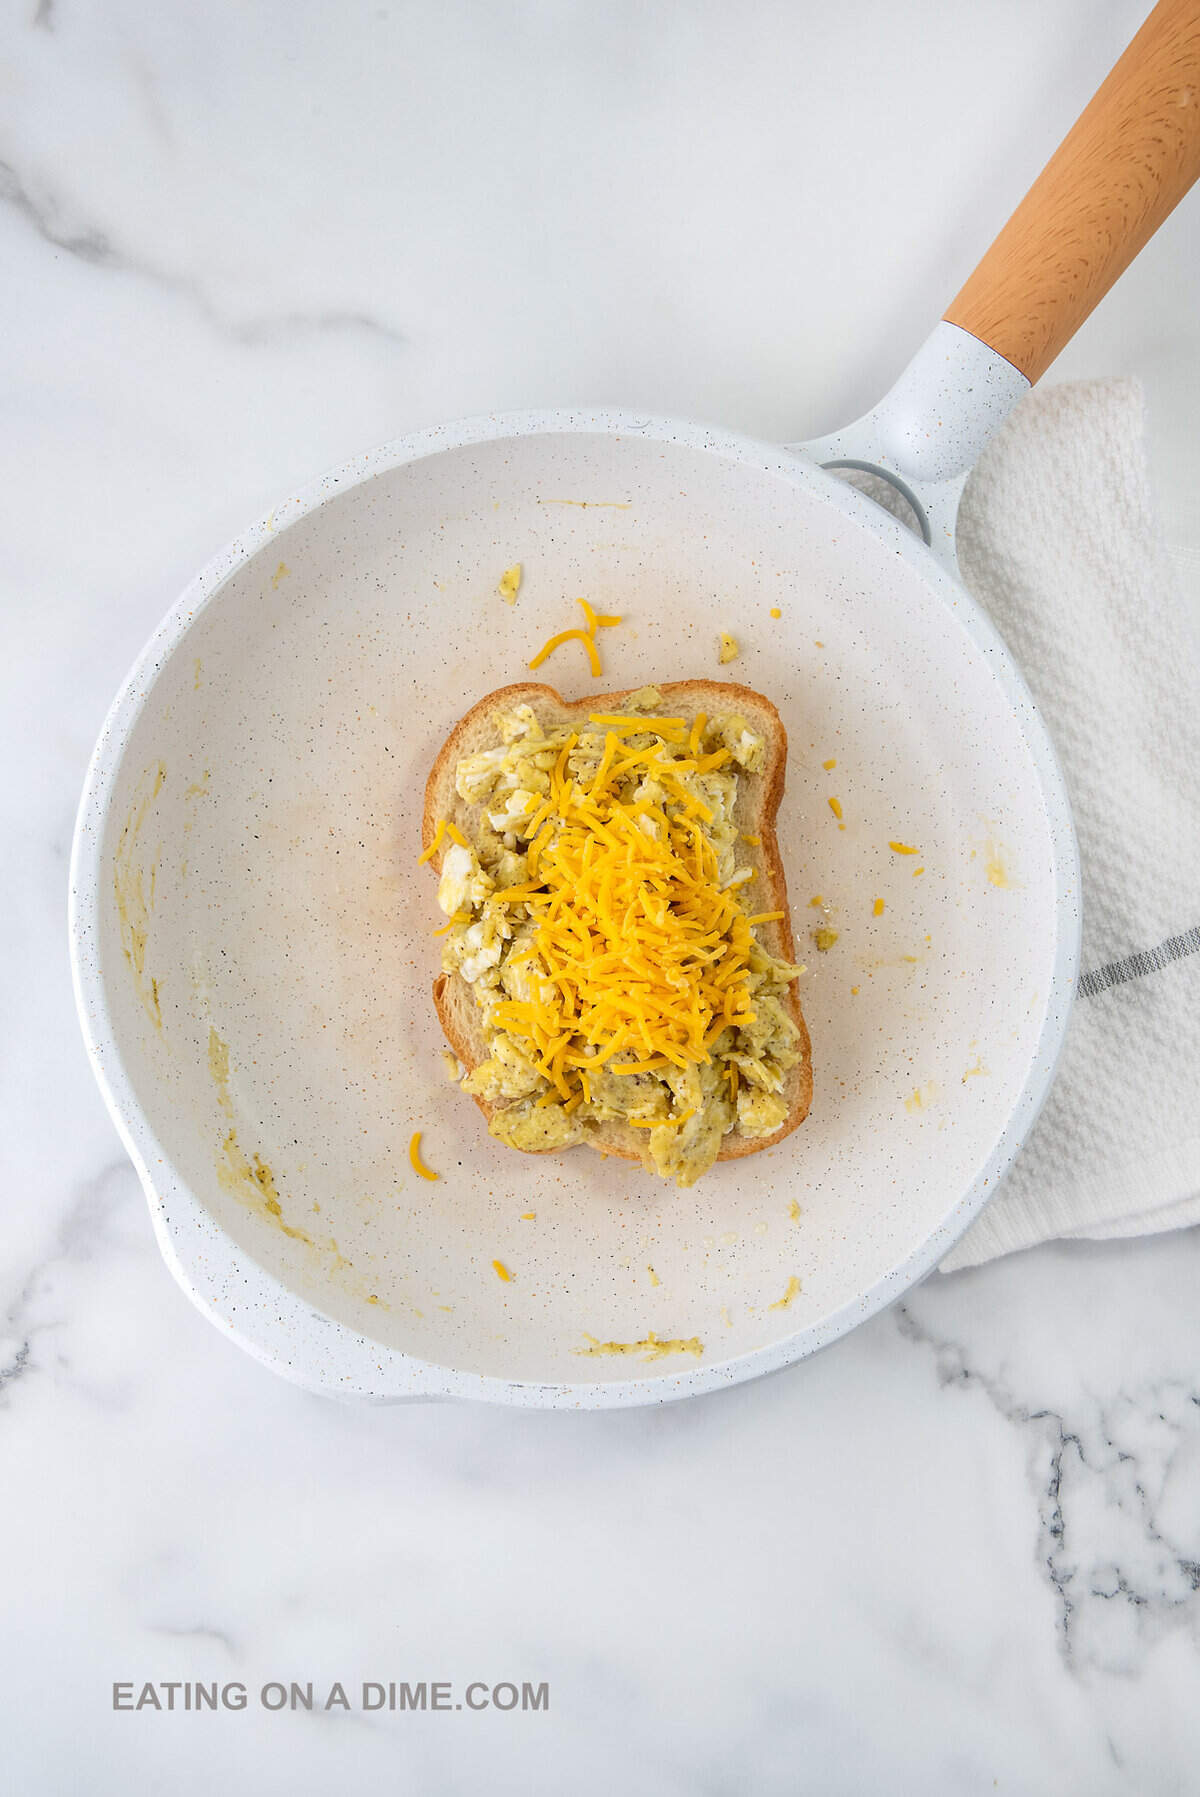 Topping the bread with scrambled eggs and shredded cheese